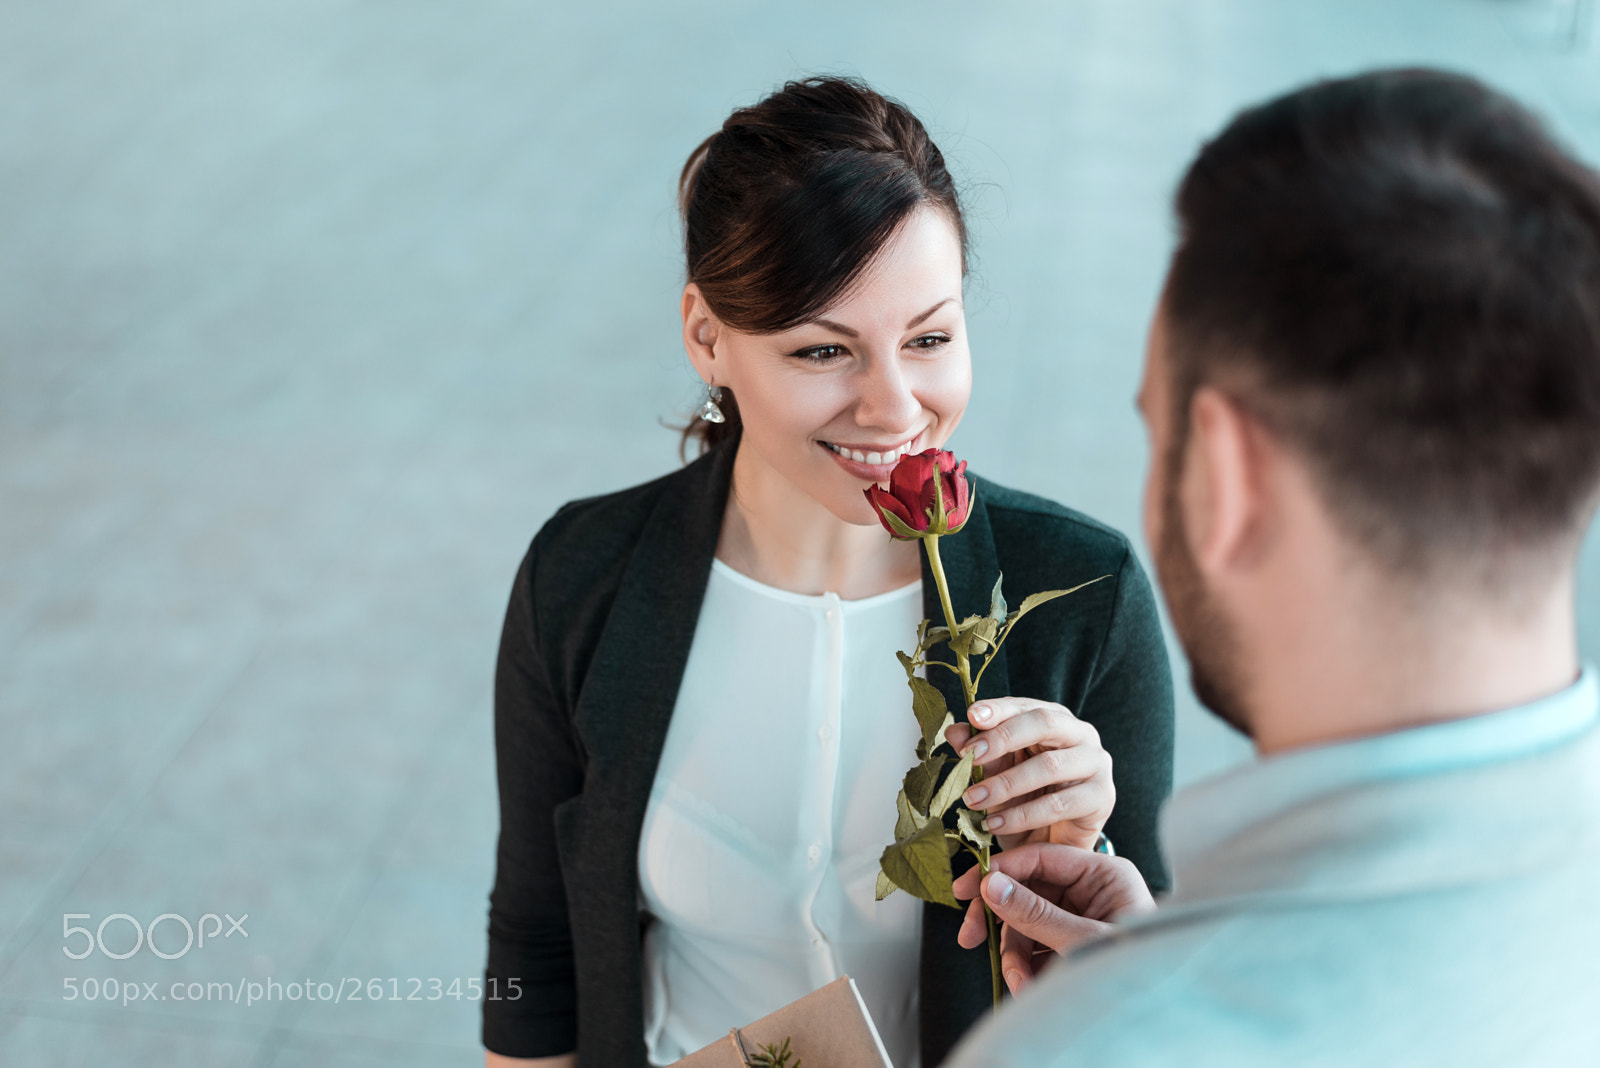 Nikon D610 sample photo. Woman smelling rose given photography